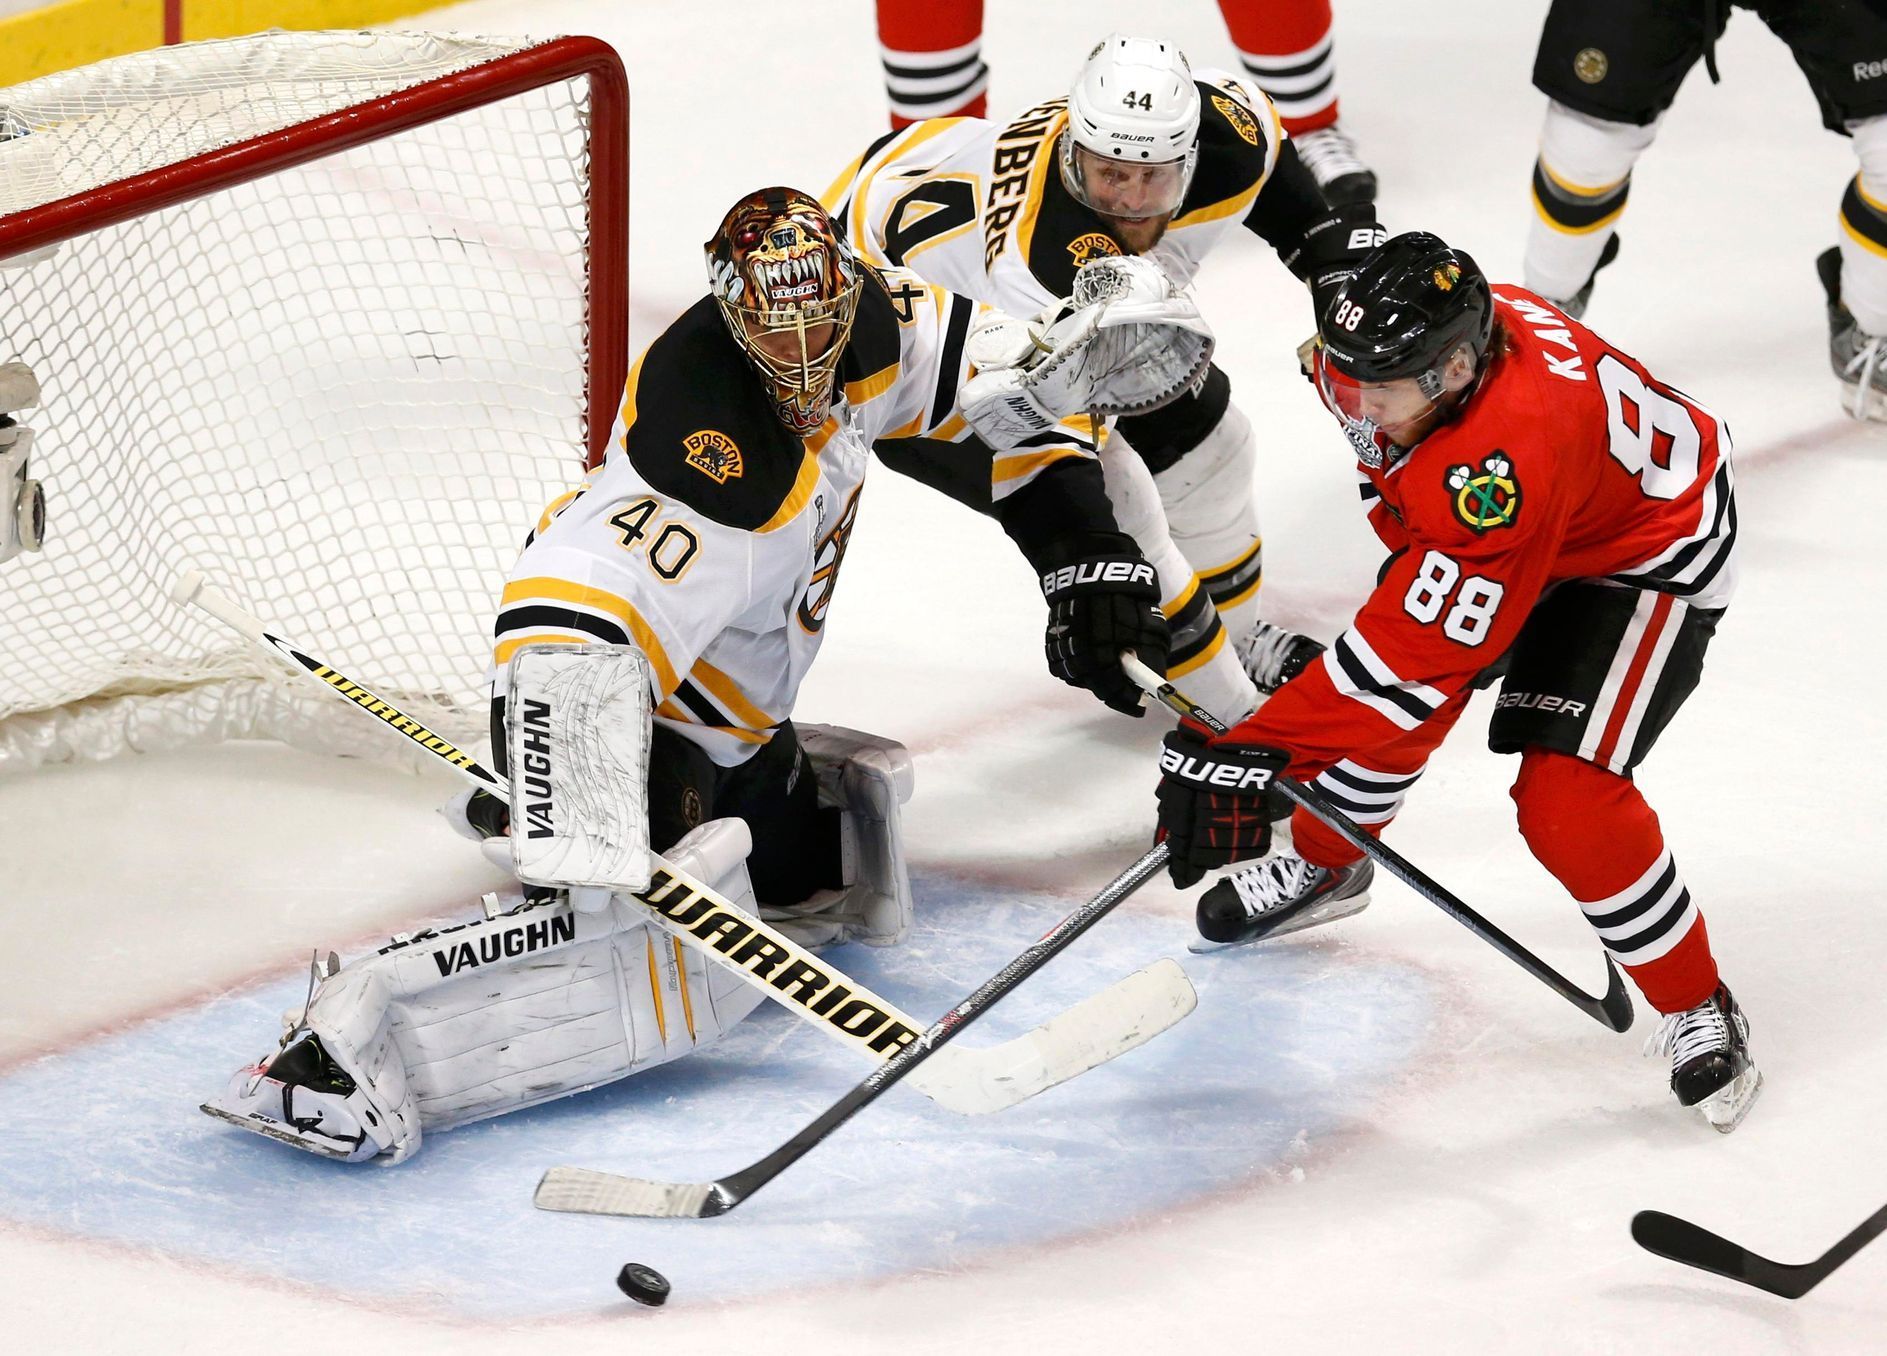 Blackhawks' Kane loses control of the puck while attempting